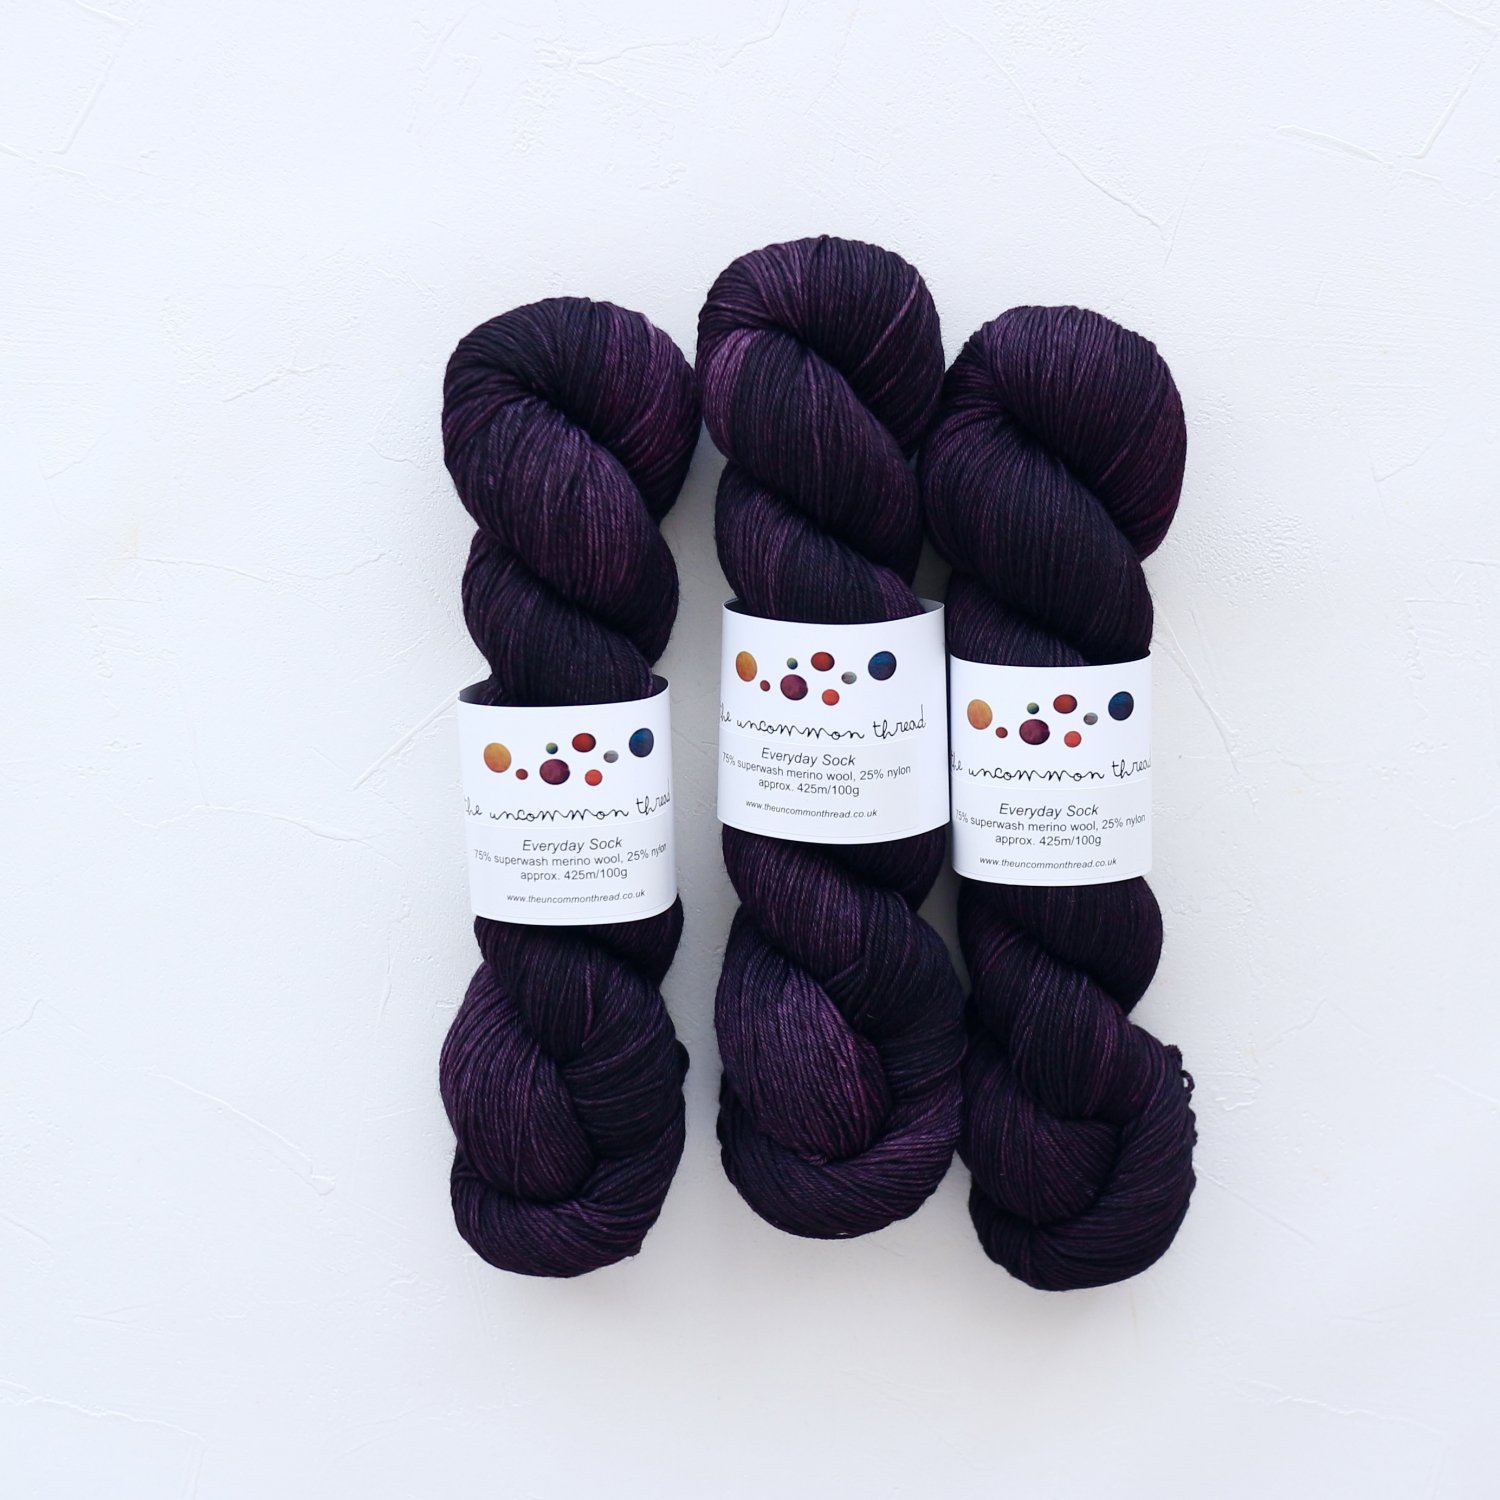 The Uncommon Thread<br>Everyday Sock<br>Aged Merlot